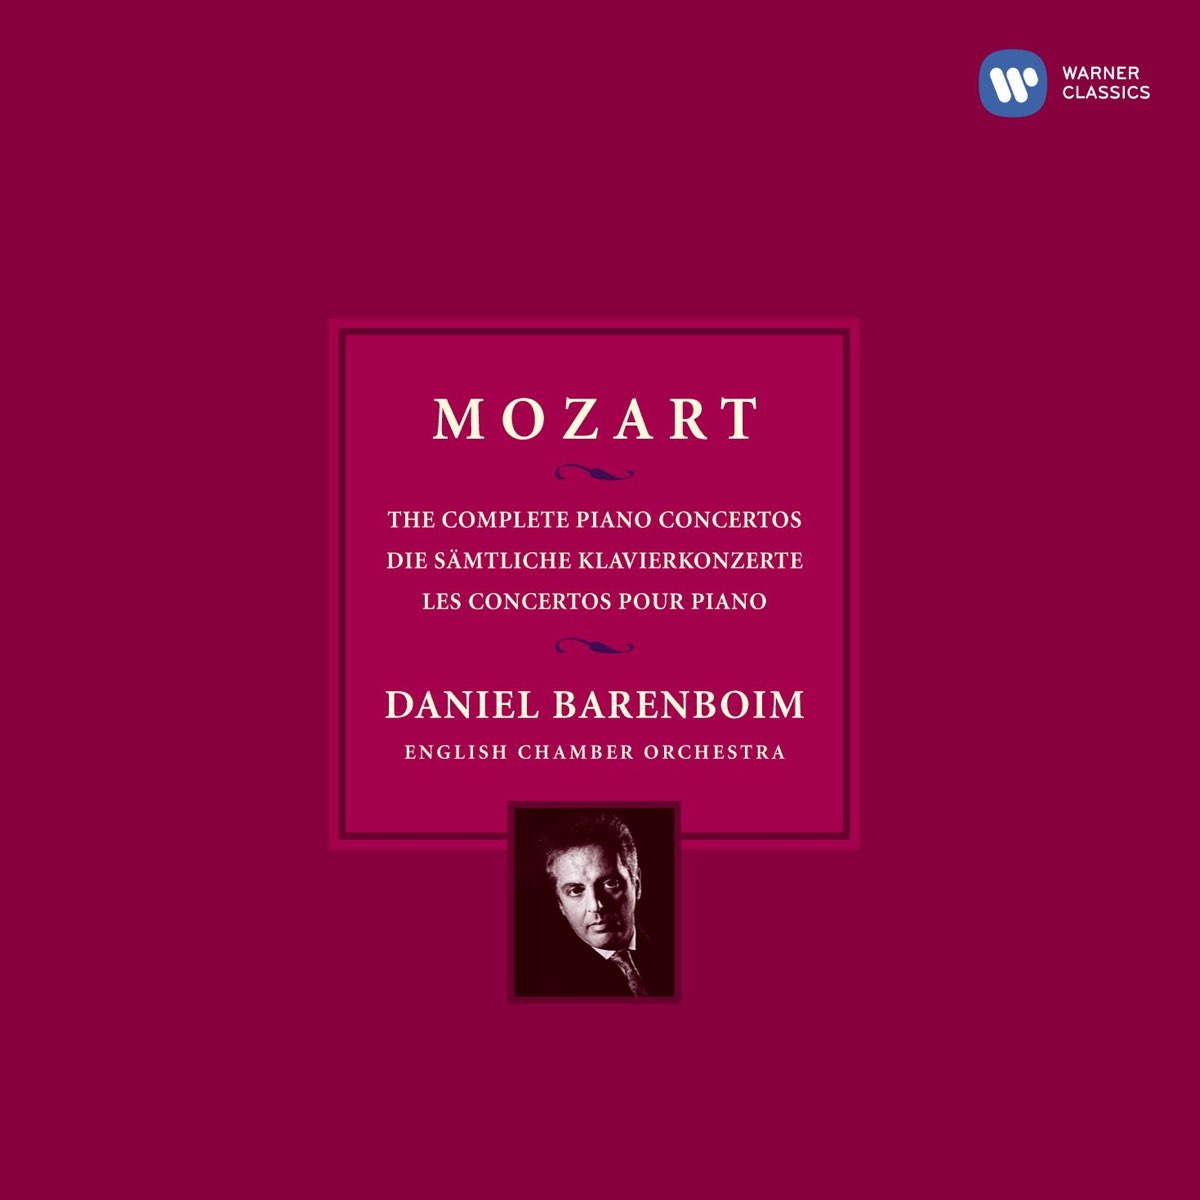 ‎Mozart: The Complete Piano Concertos (Remastered) by Daniel Barenboim &  English Chamber Orchestra on Apple Music